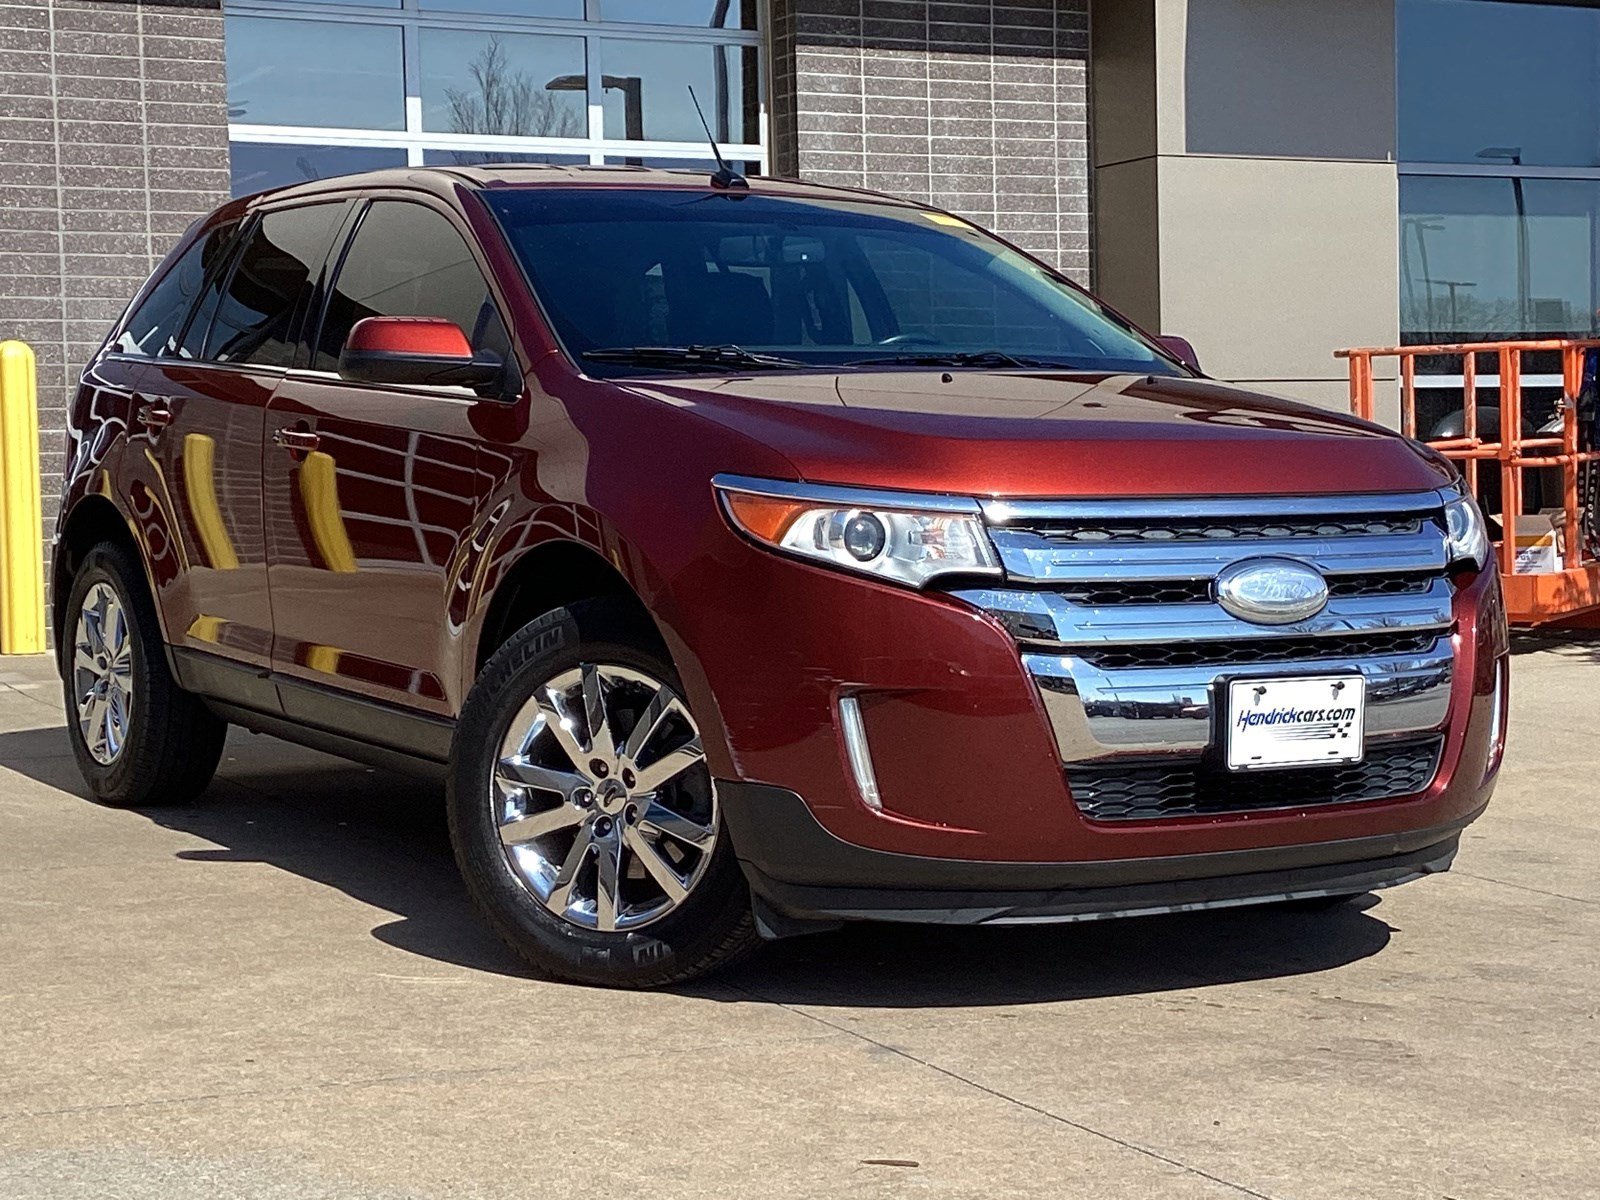 Pre-Owned 2014 Ford Edge Limited SUV in Norfolk #Q05241B | Rick Hendrick  Chevrolet Norfolk